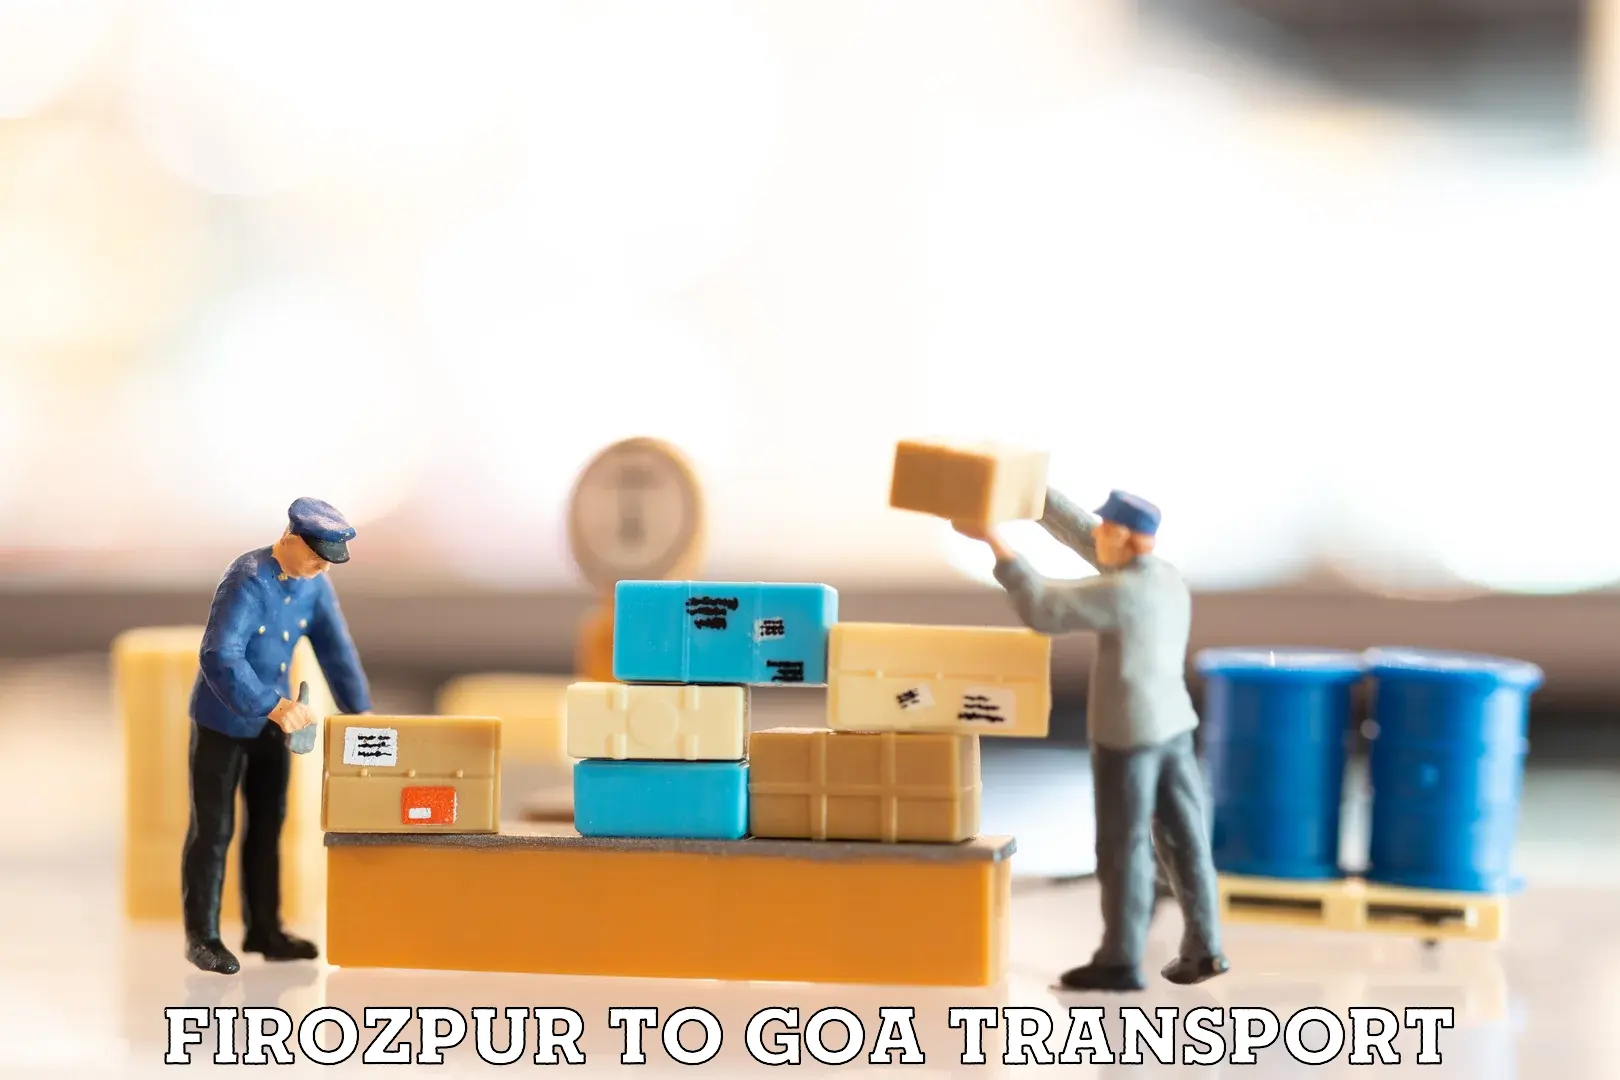 Commercial transport service Firozpur to Ponda